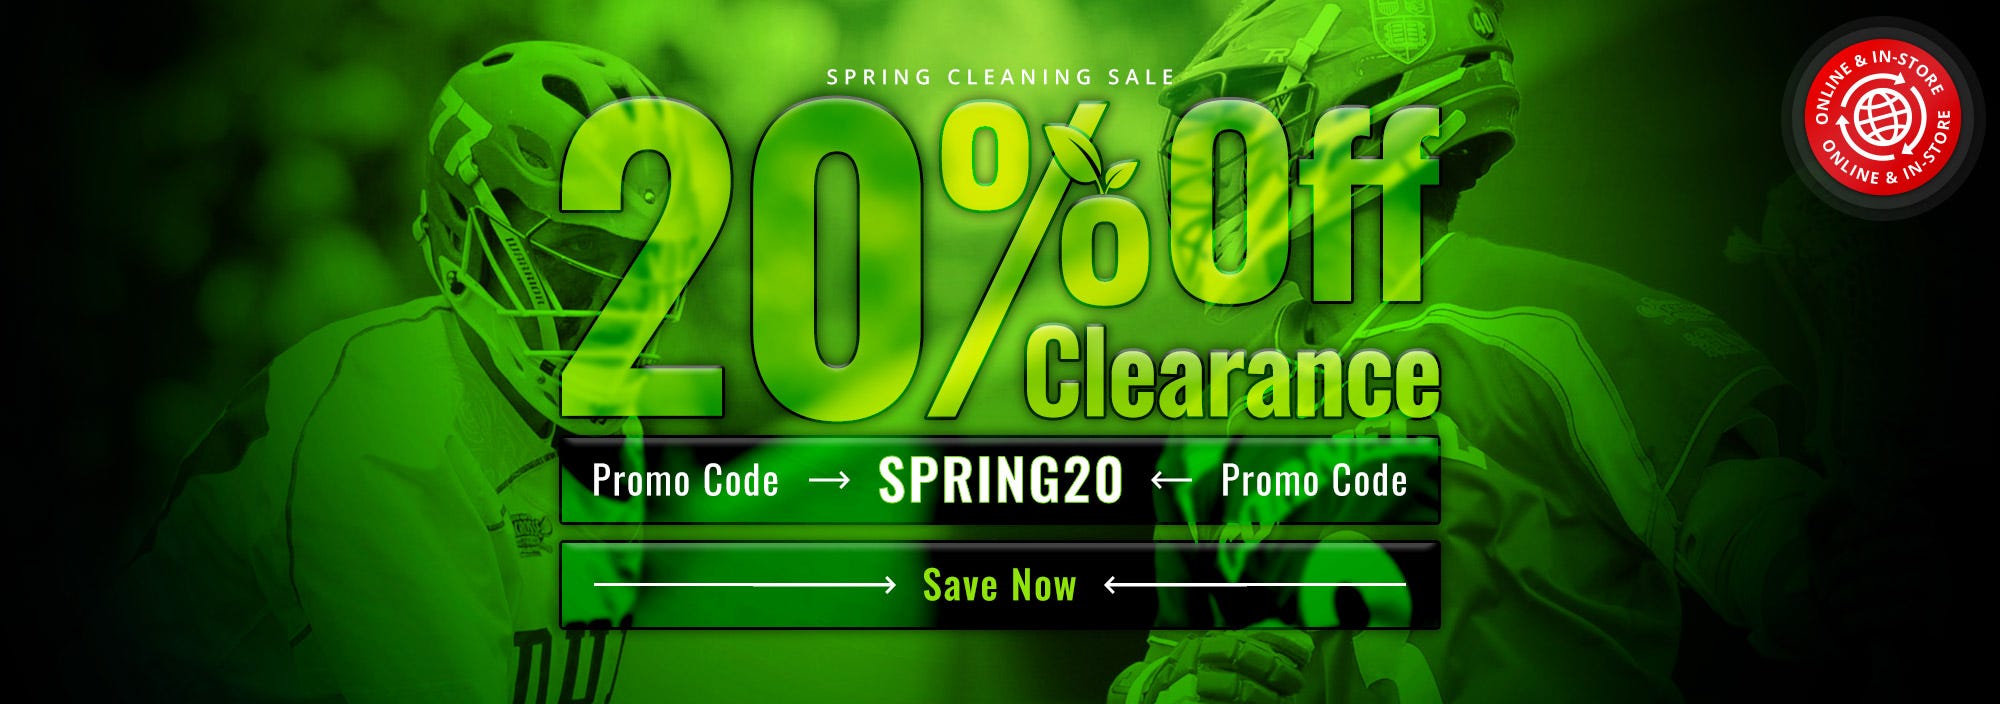 Spring Cleaning Sale: 20% off clearance